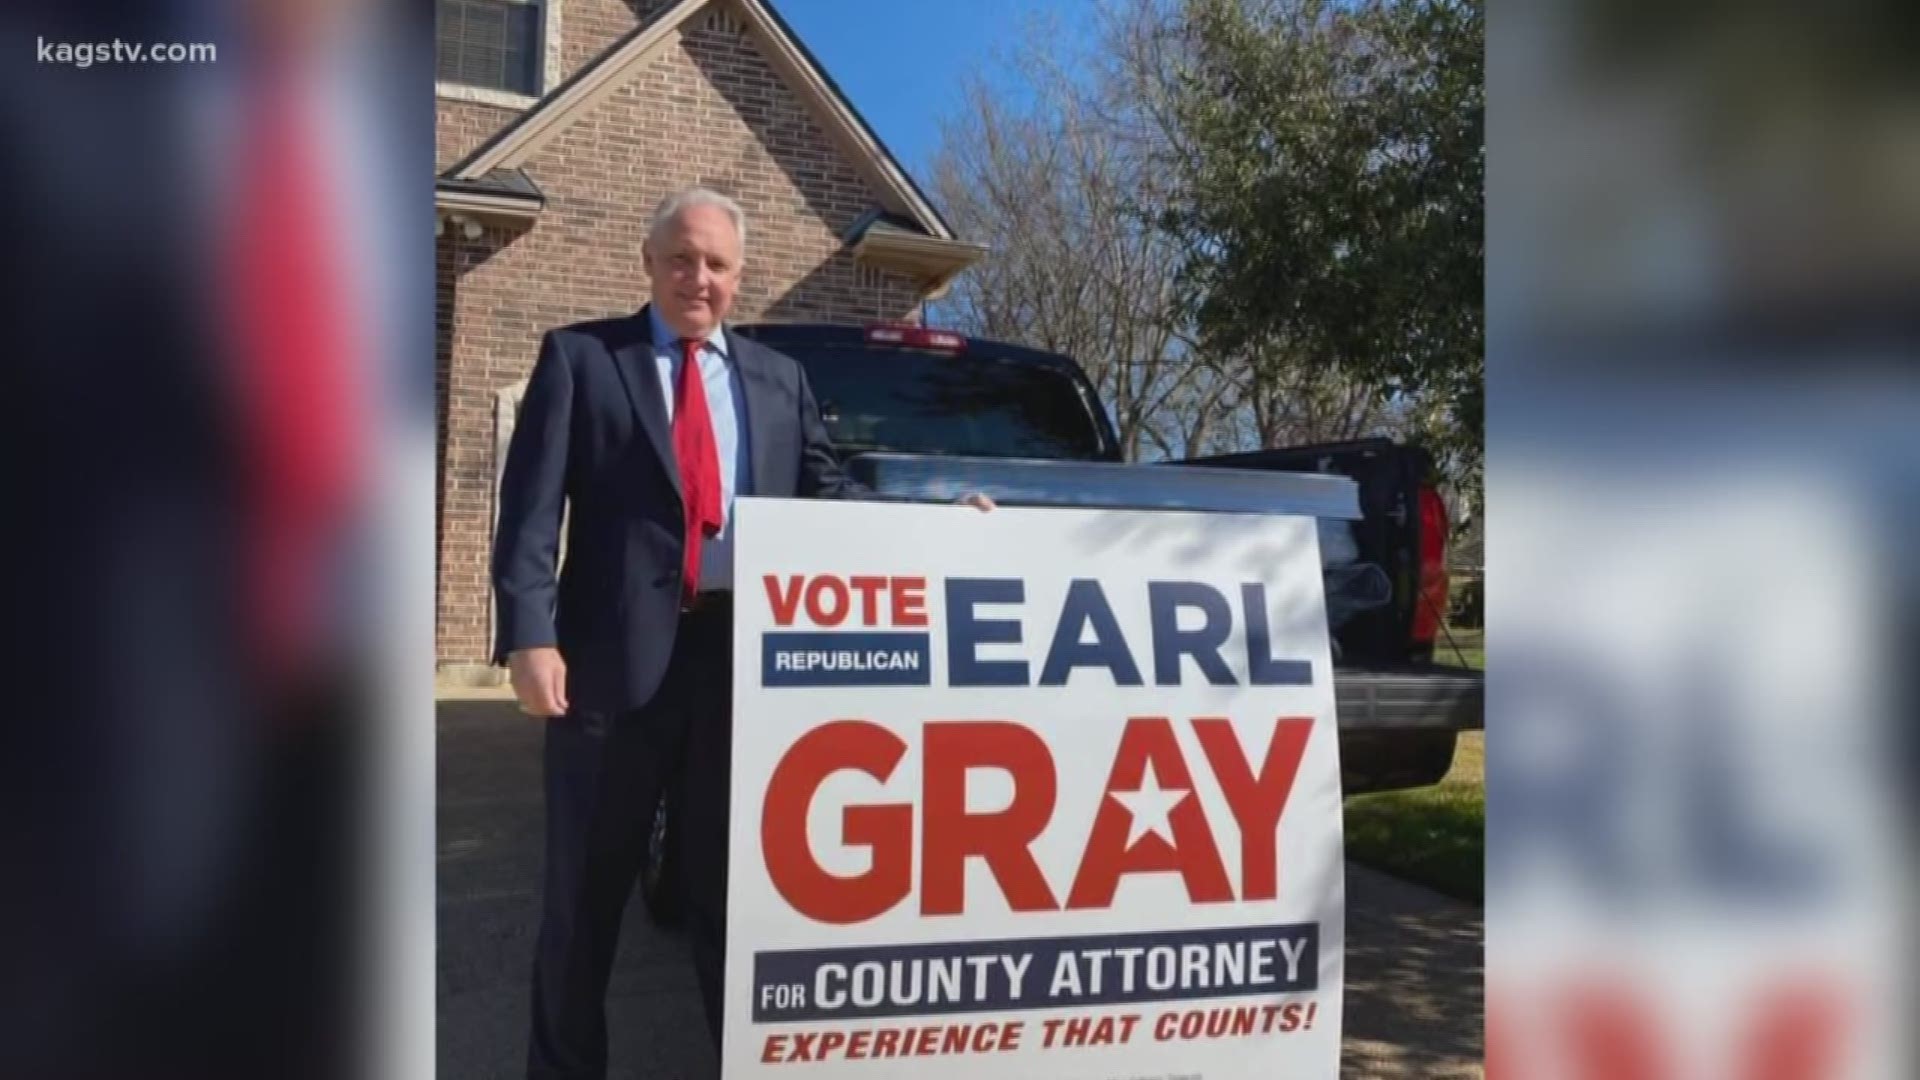 Earl Gray believes it is the county attorney's responsibility to make sure any DWI's are dealt with and do not repeat itself.